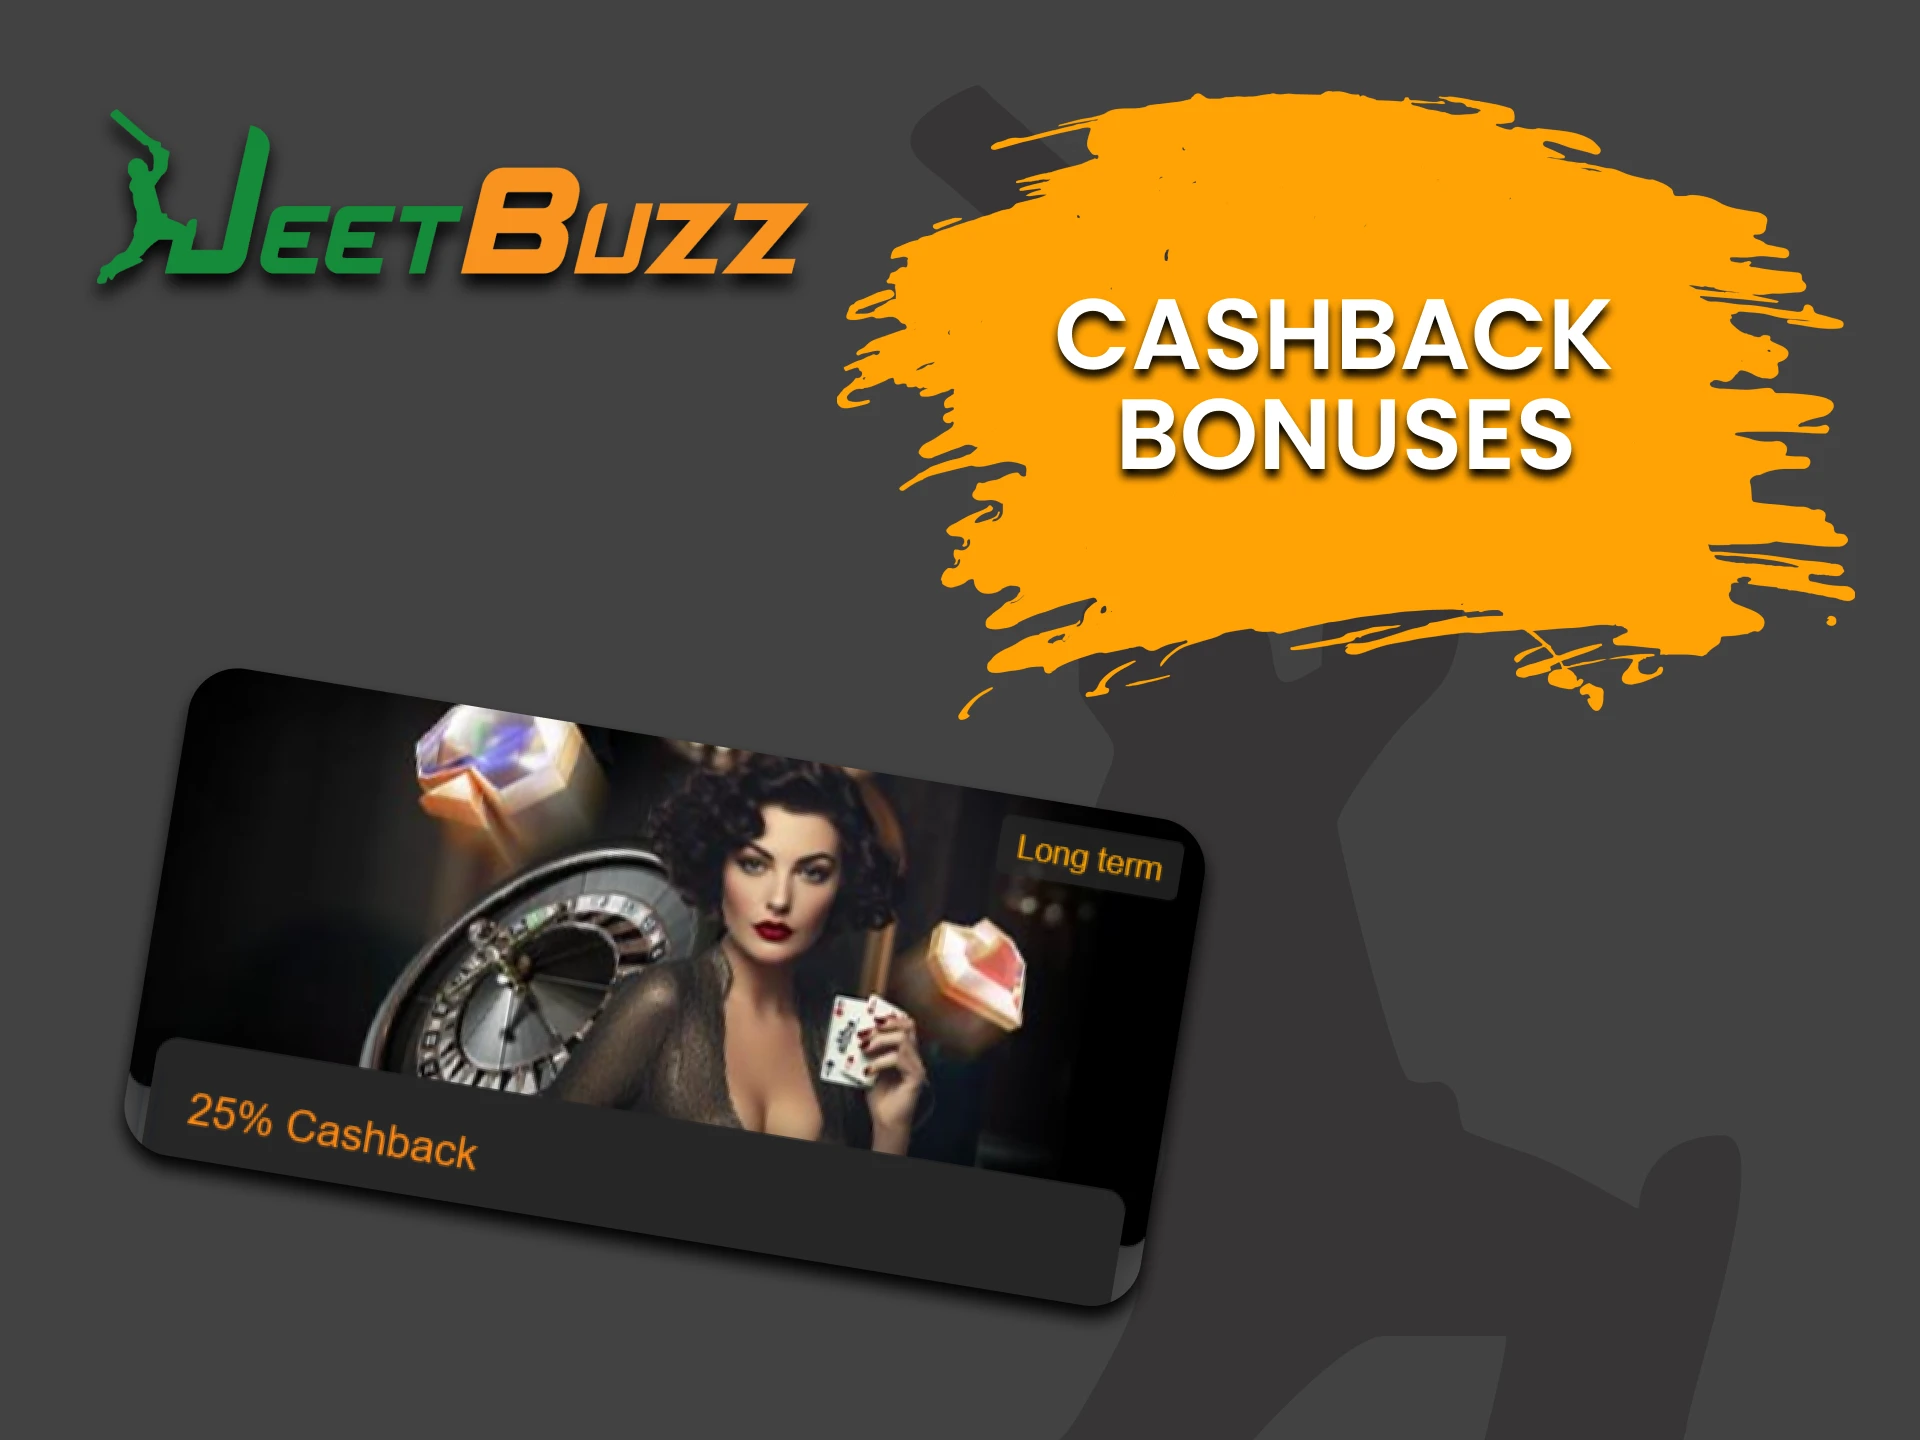 JeetBuzz gives a cashback bonus for playing Poker.